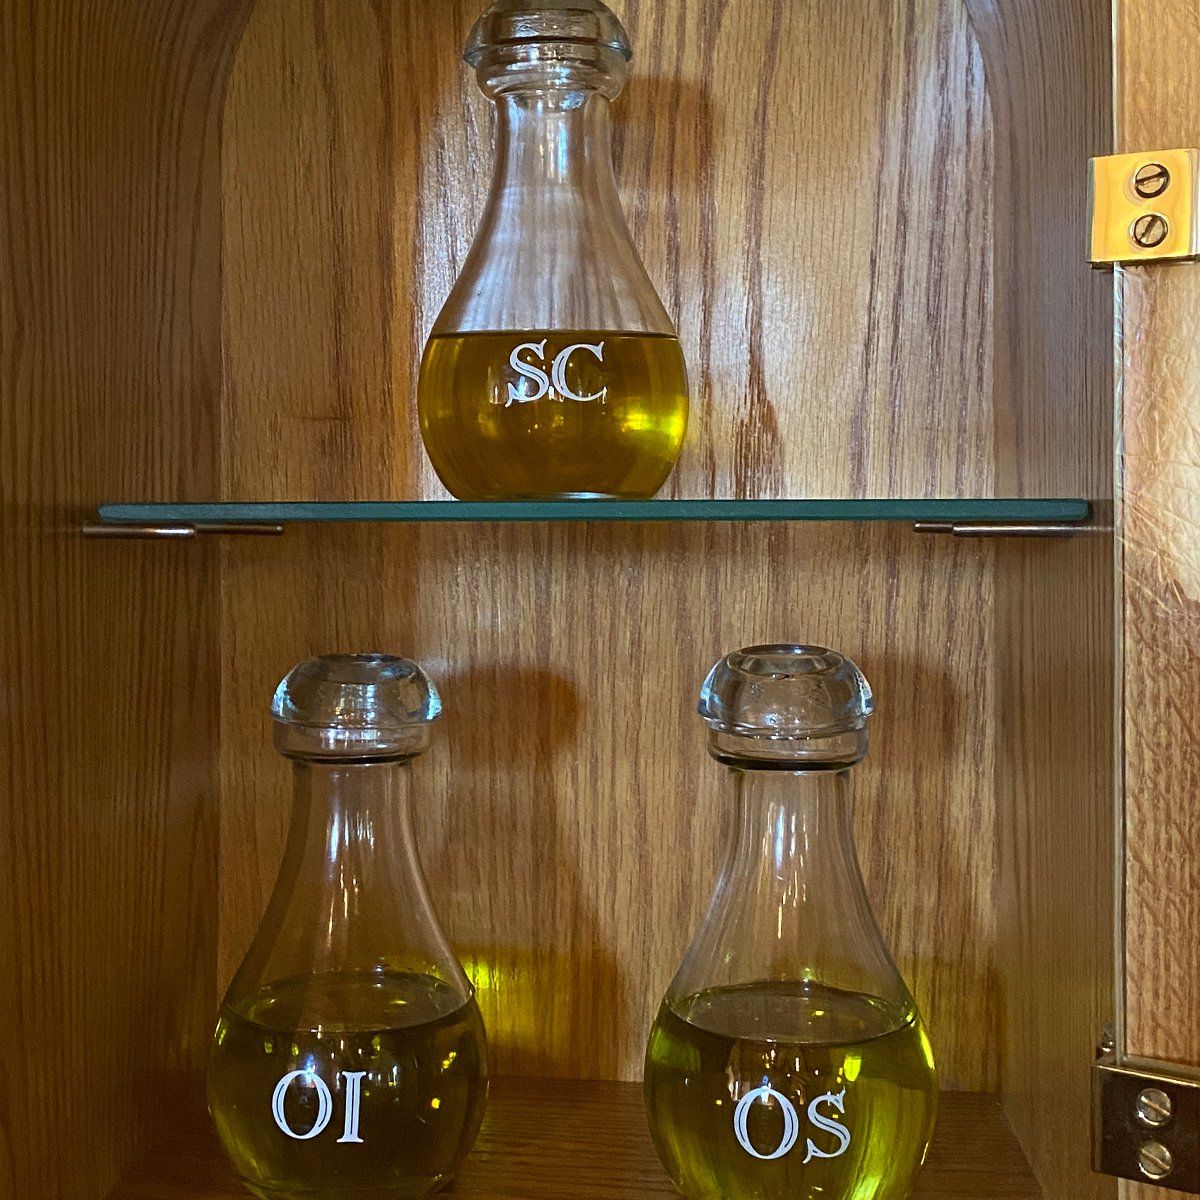 Sacred Oils located in ambry at entrance to the sanctuary.